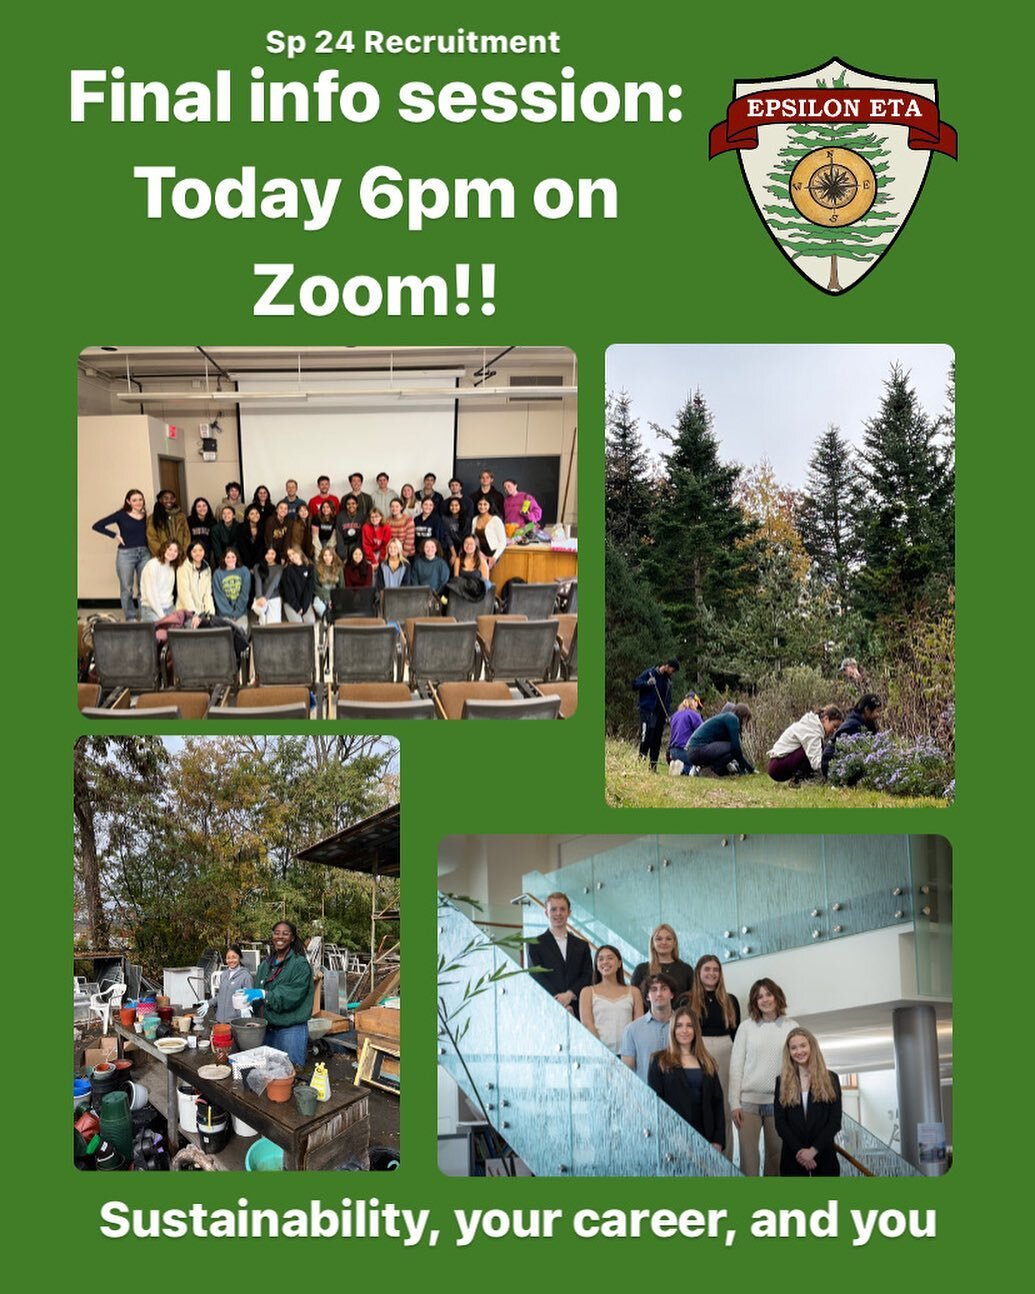 See you tonight!!! You can find the zoom link on our website under the recruitment timeline.